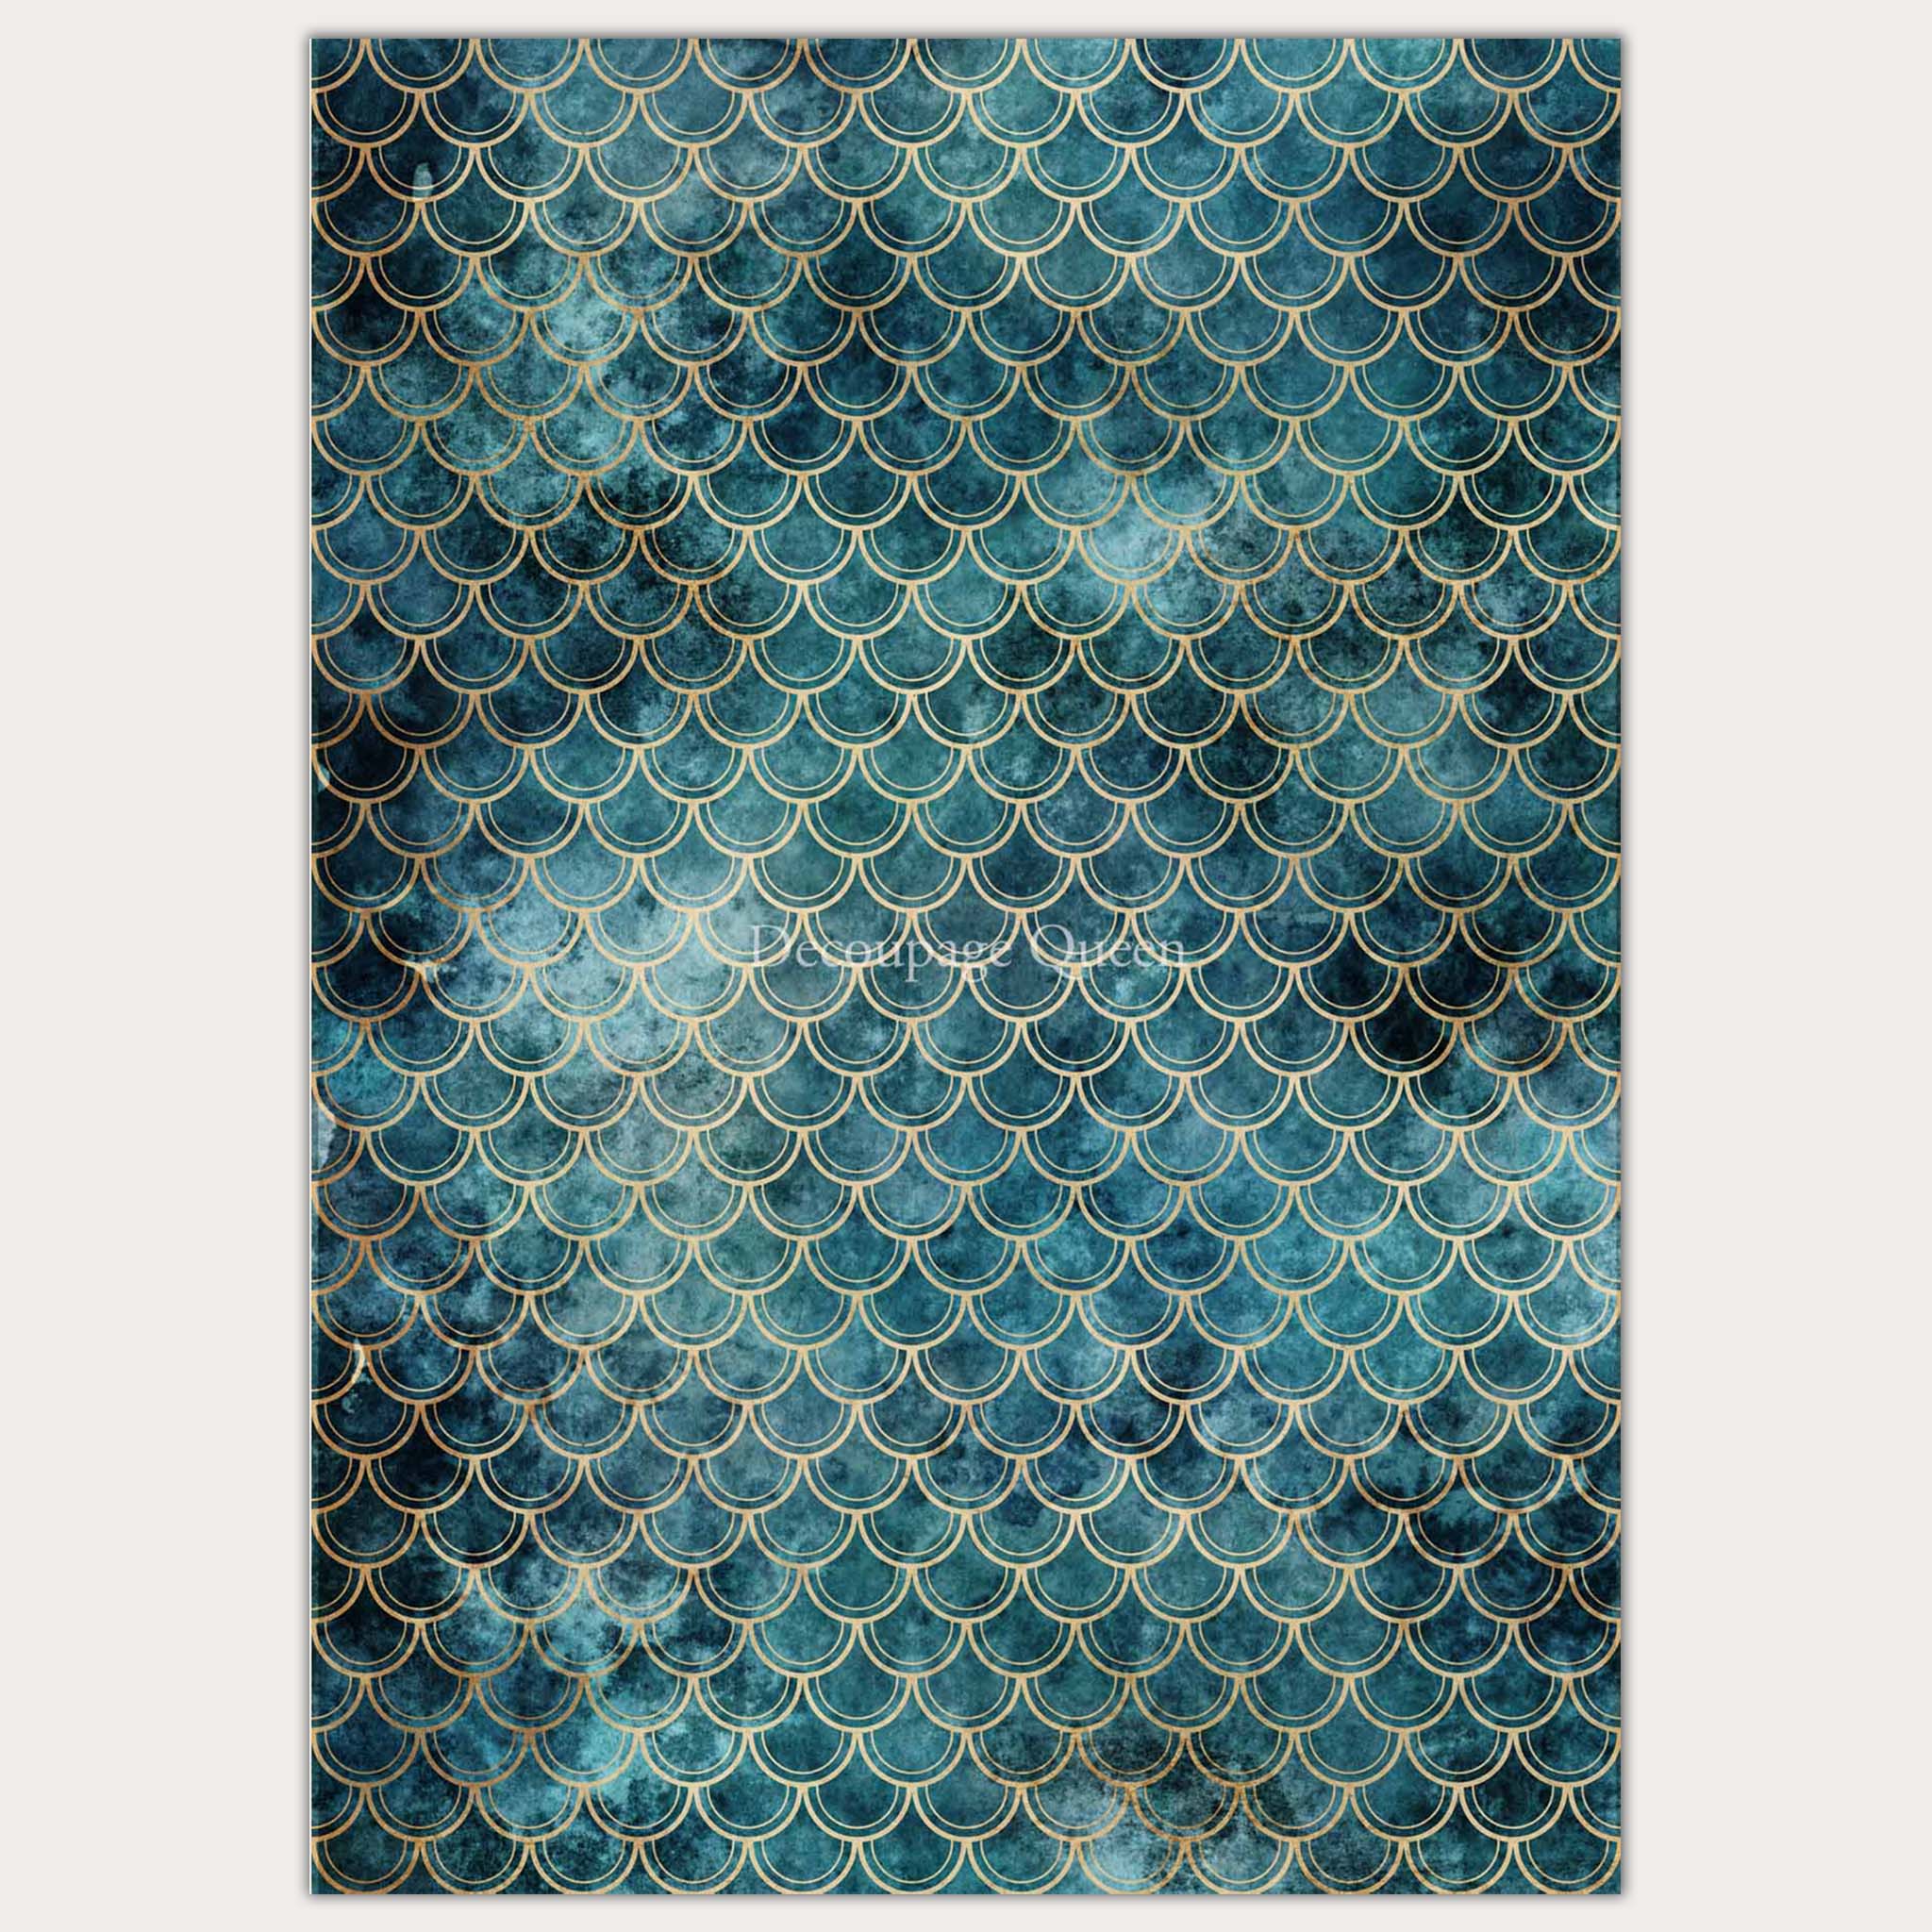 A2 rice paper design that features a blend of dark blue and teal with a gold mermaid scale pattern on it. White borders are on the sides.